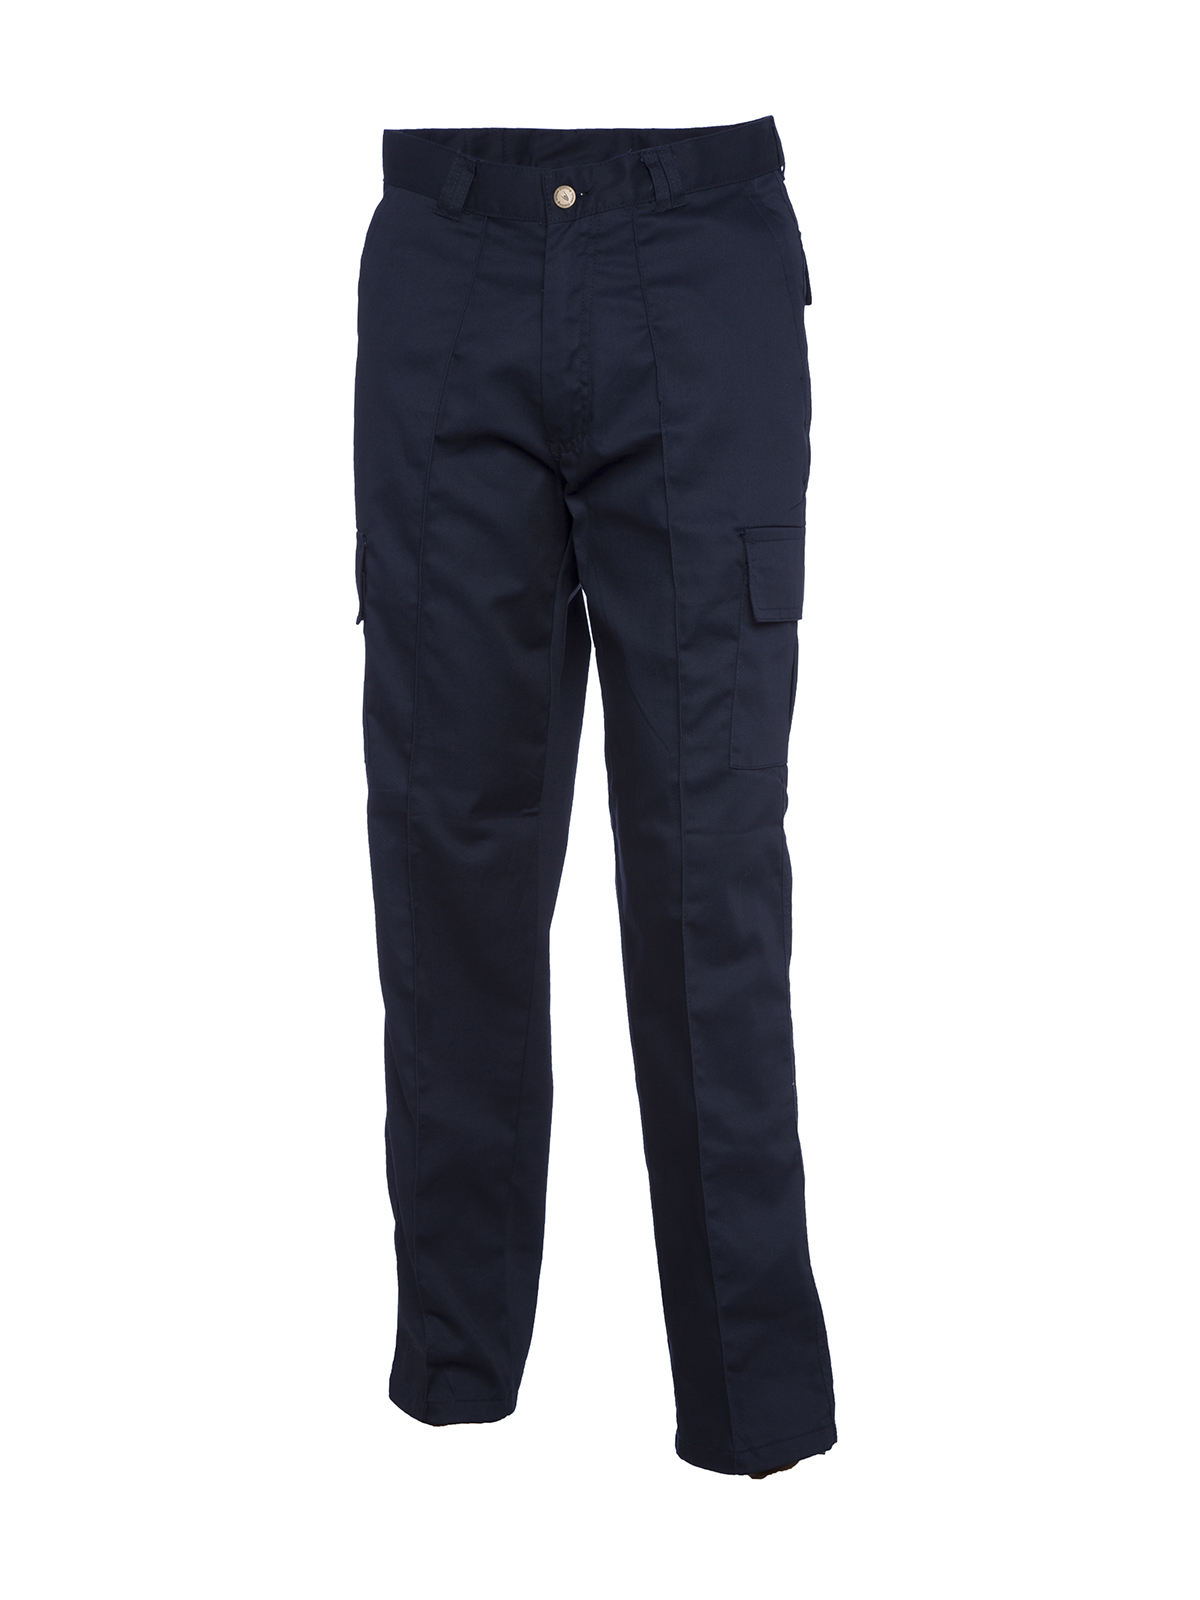 Cargo Trousers, Navy Blue - 32R